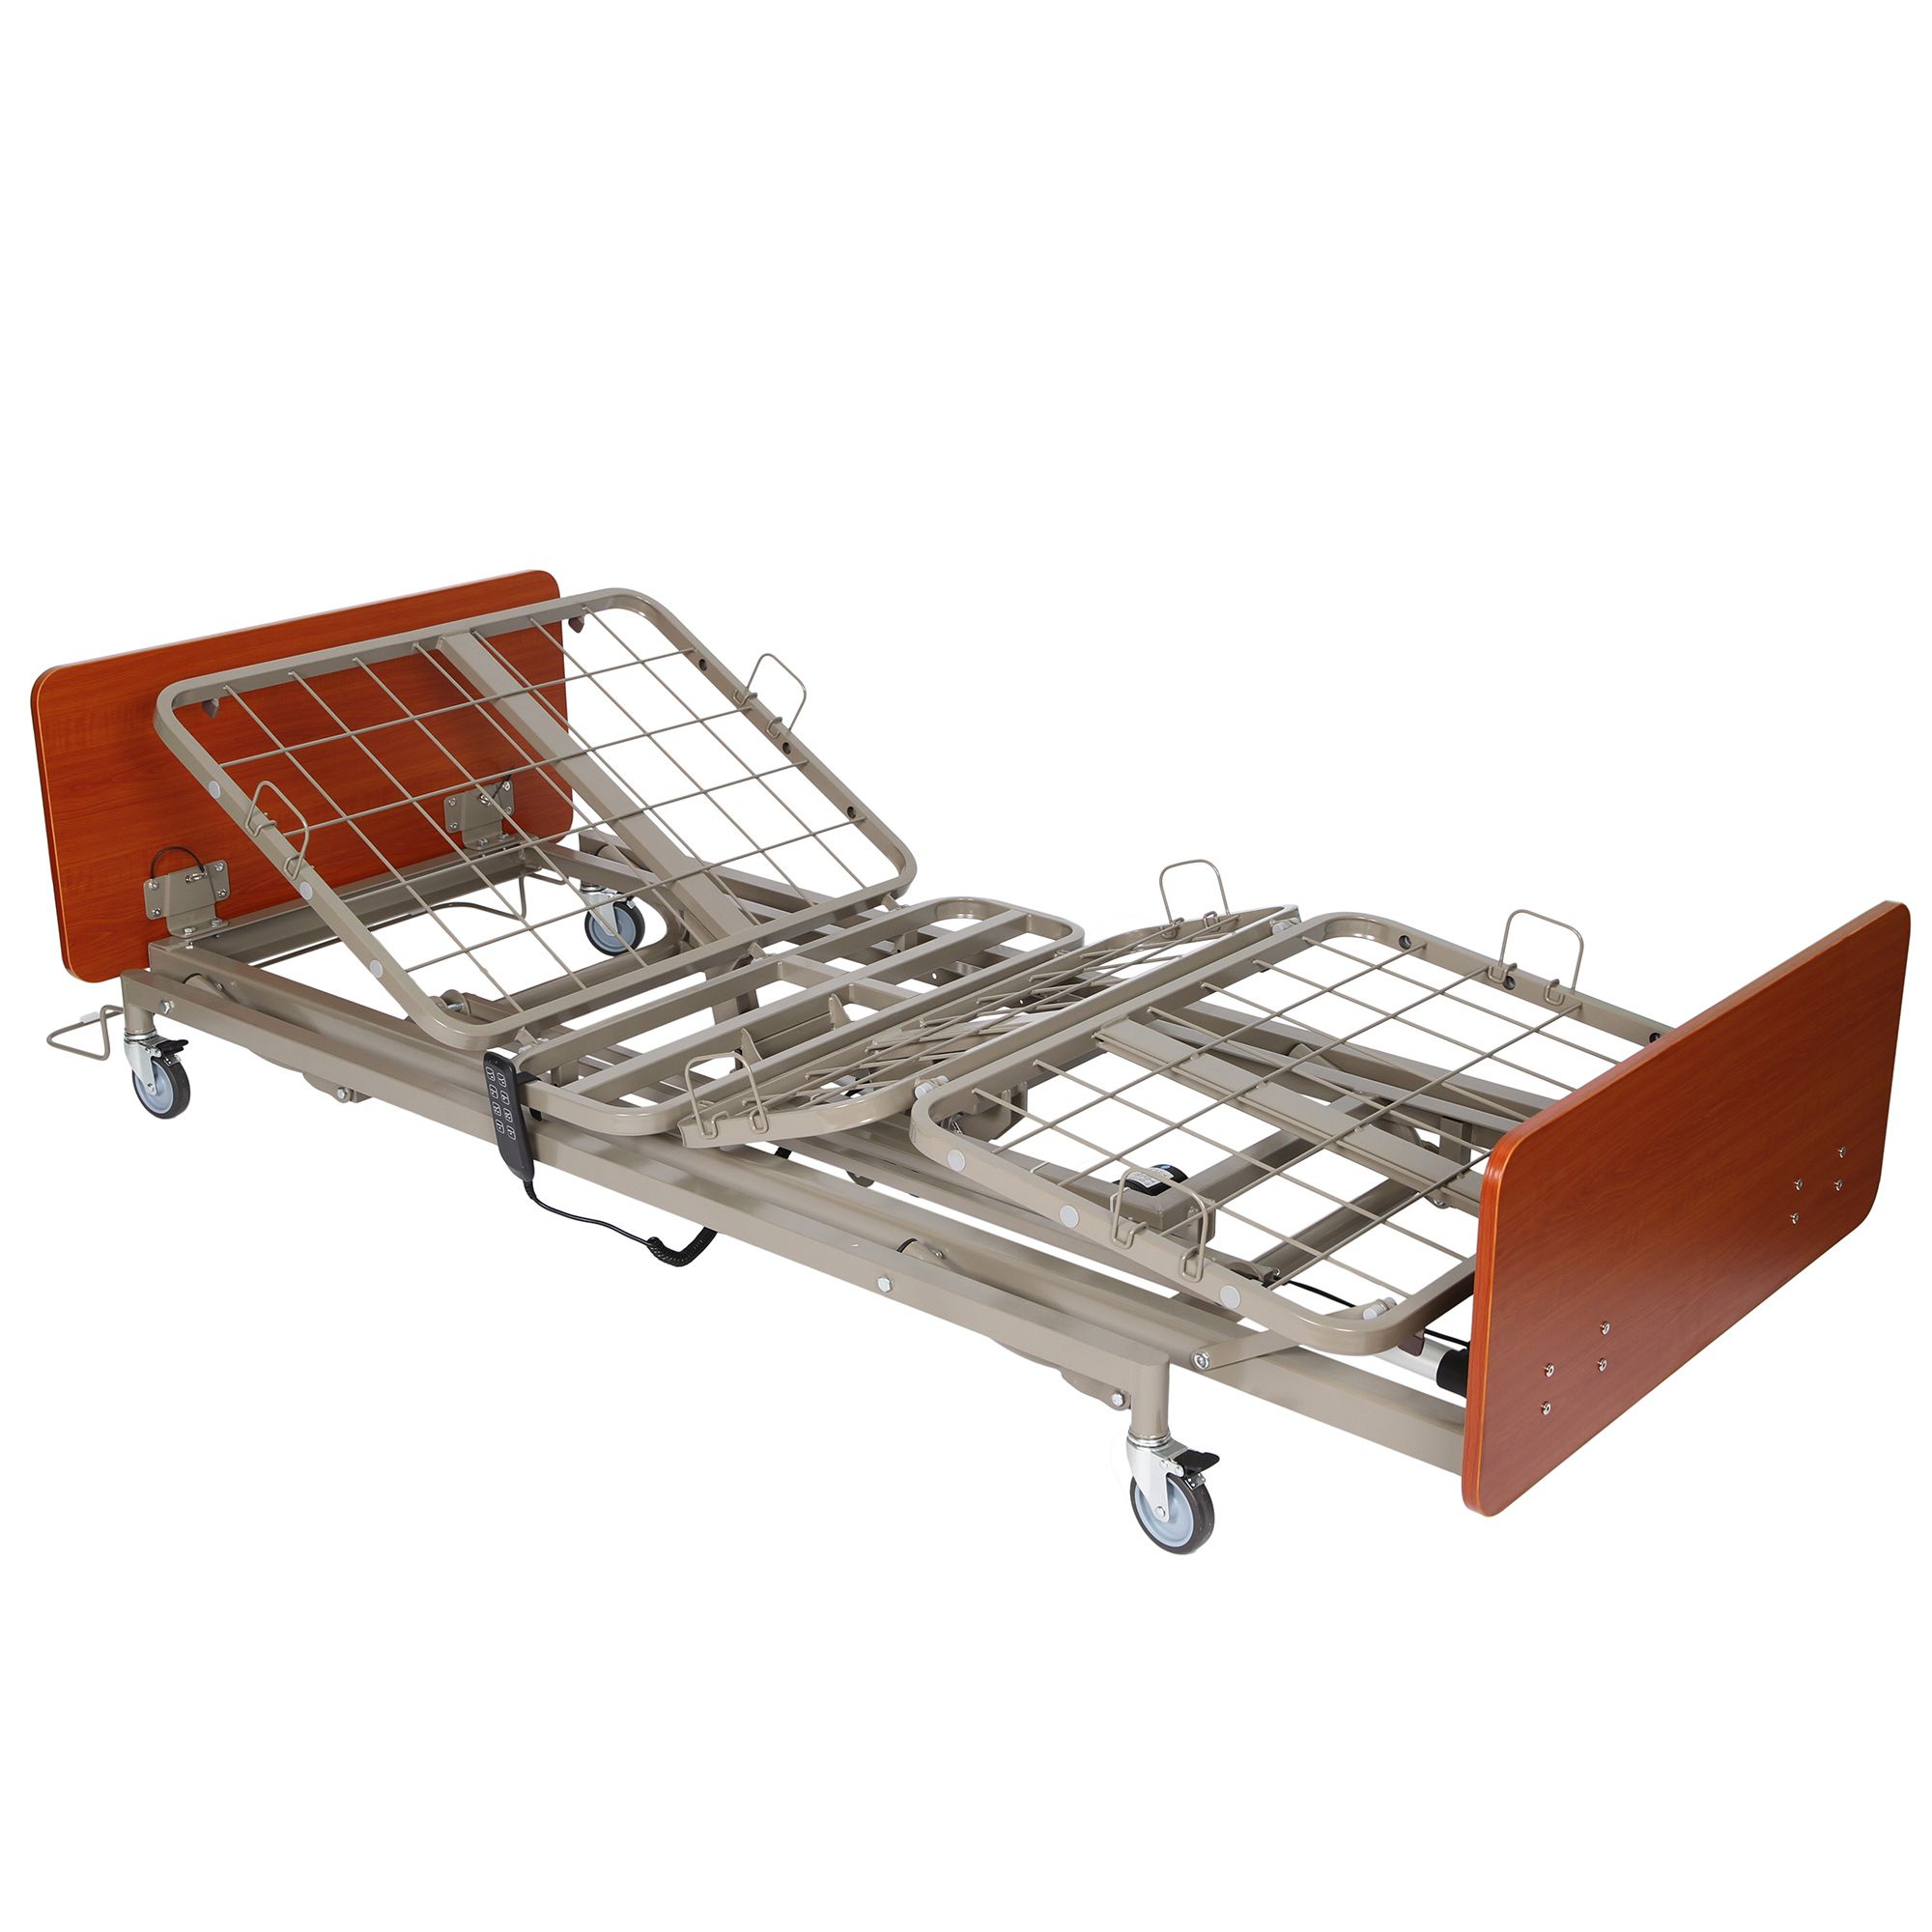 Basic Multi Functions Medical Used Manual Patient Bed At Hospital For Sale  - Buy Manufacture Inexpensive Geriatric Medical Supplies For Nursing Homes  Or Hospitals,Quality Home Care Beds With Toilets At Low Prices